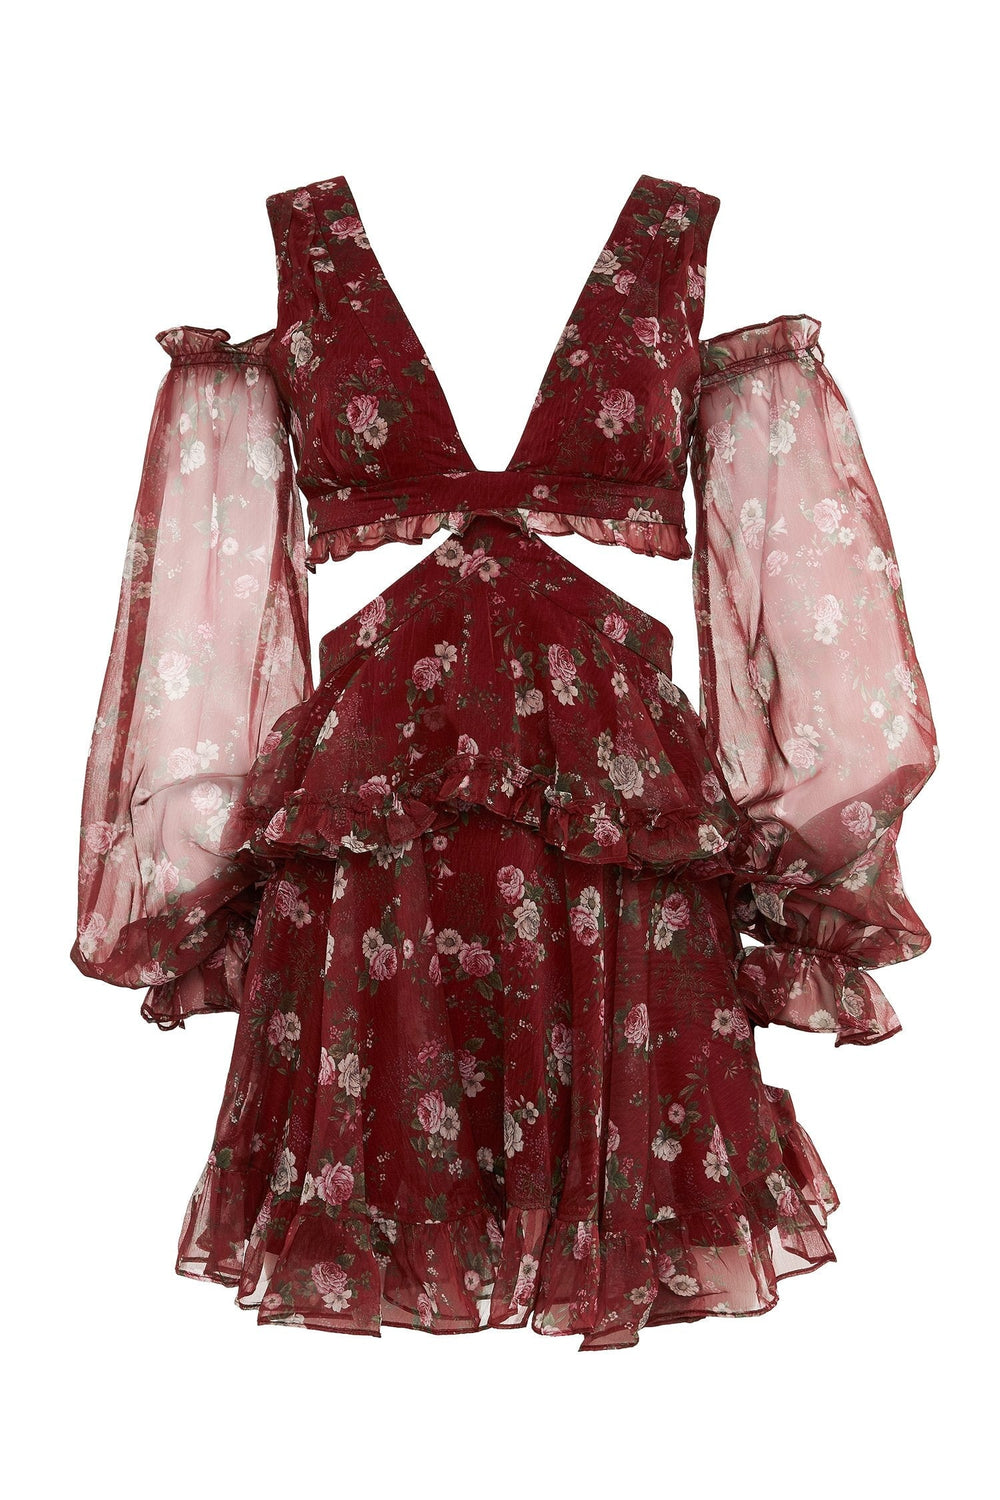 Annabell Dress - Floral Printed Mini Dress with Cut-Out & Sheer Sleeve